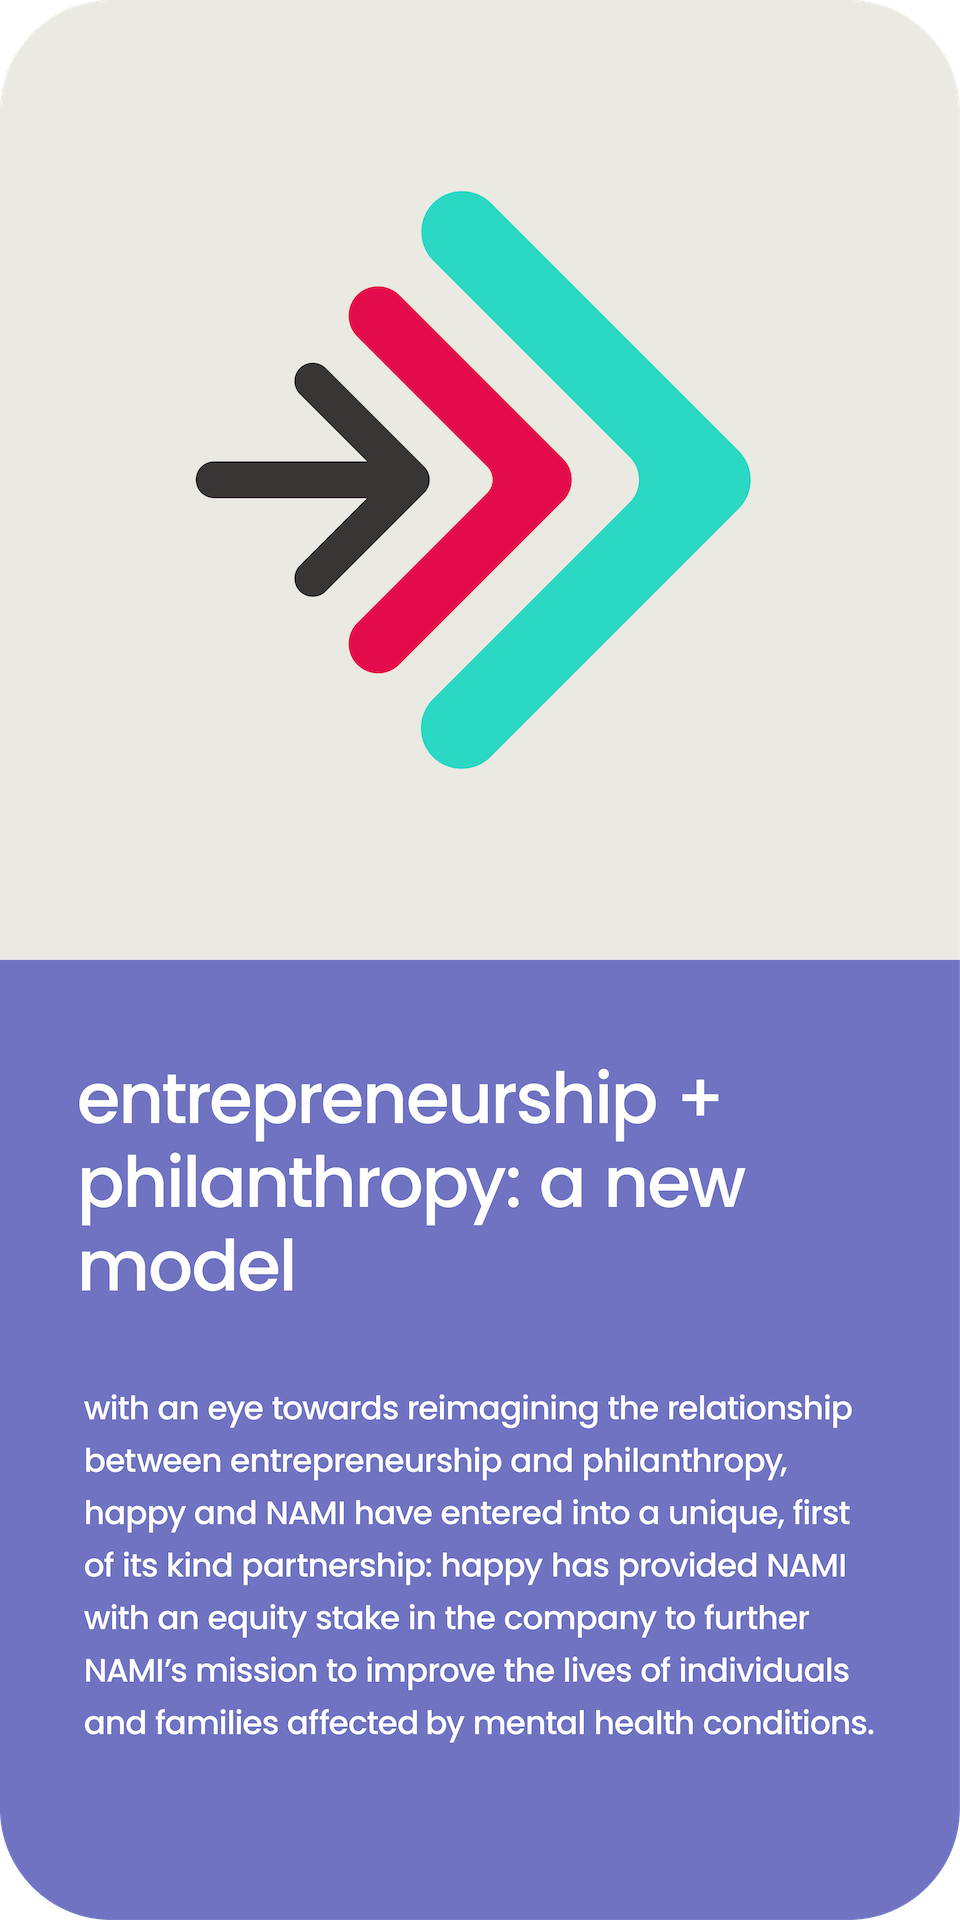 Entrepreneurship + Philanthropy: a new model. with an eye towards reimagining the relationship between entrepreneurship and philanthropy, happy and NAMI have entered into a unique, first of its kind partnership: happy has provided NAMI with an equity stake in the company. 